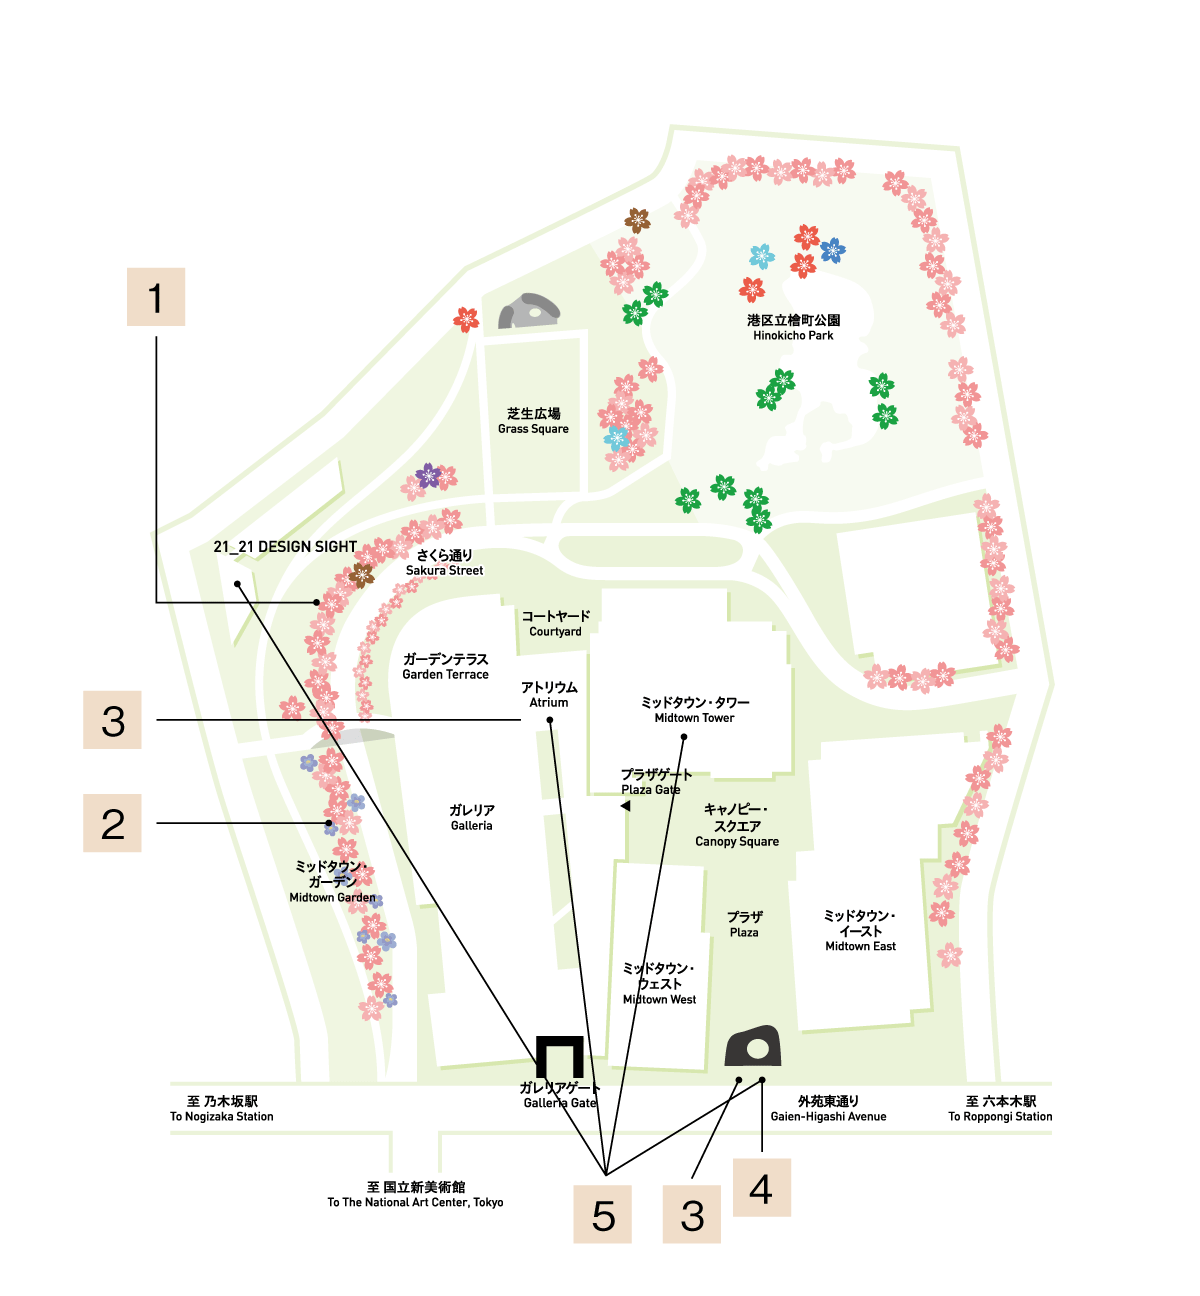 EVENT MAP